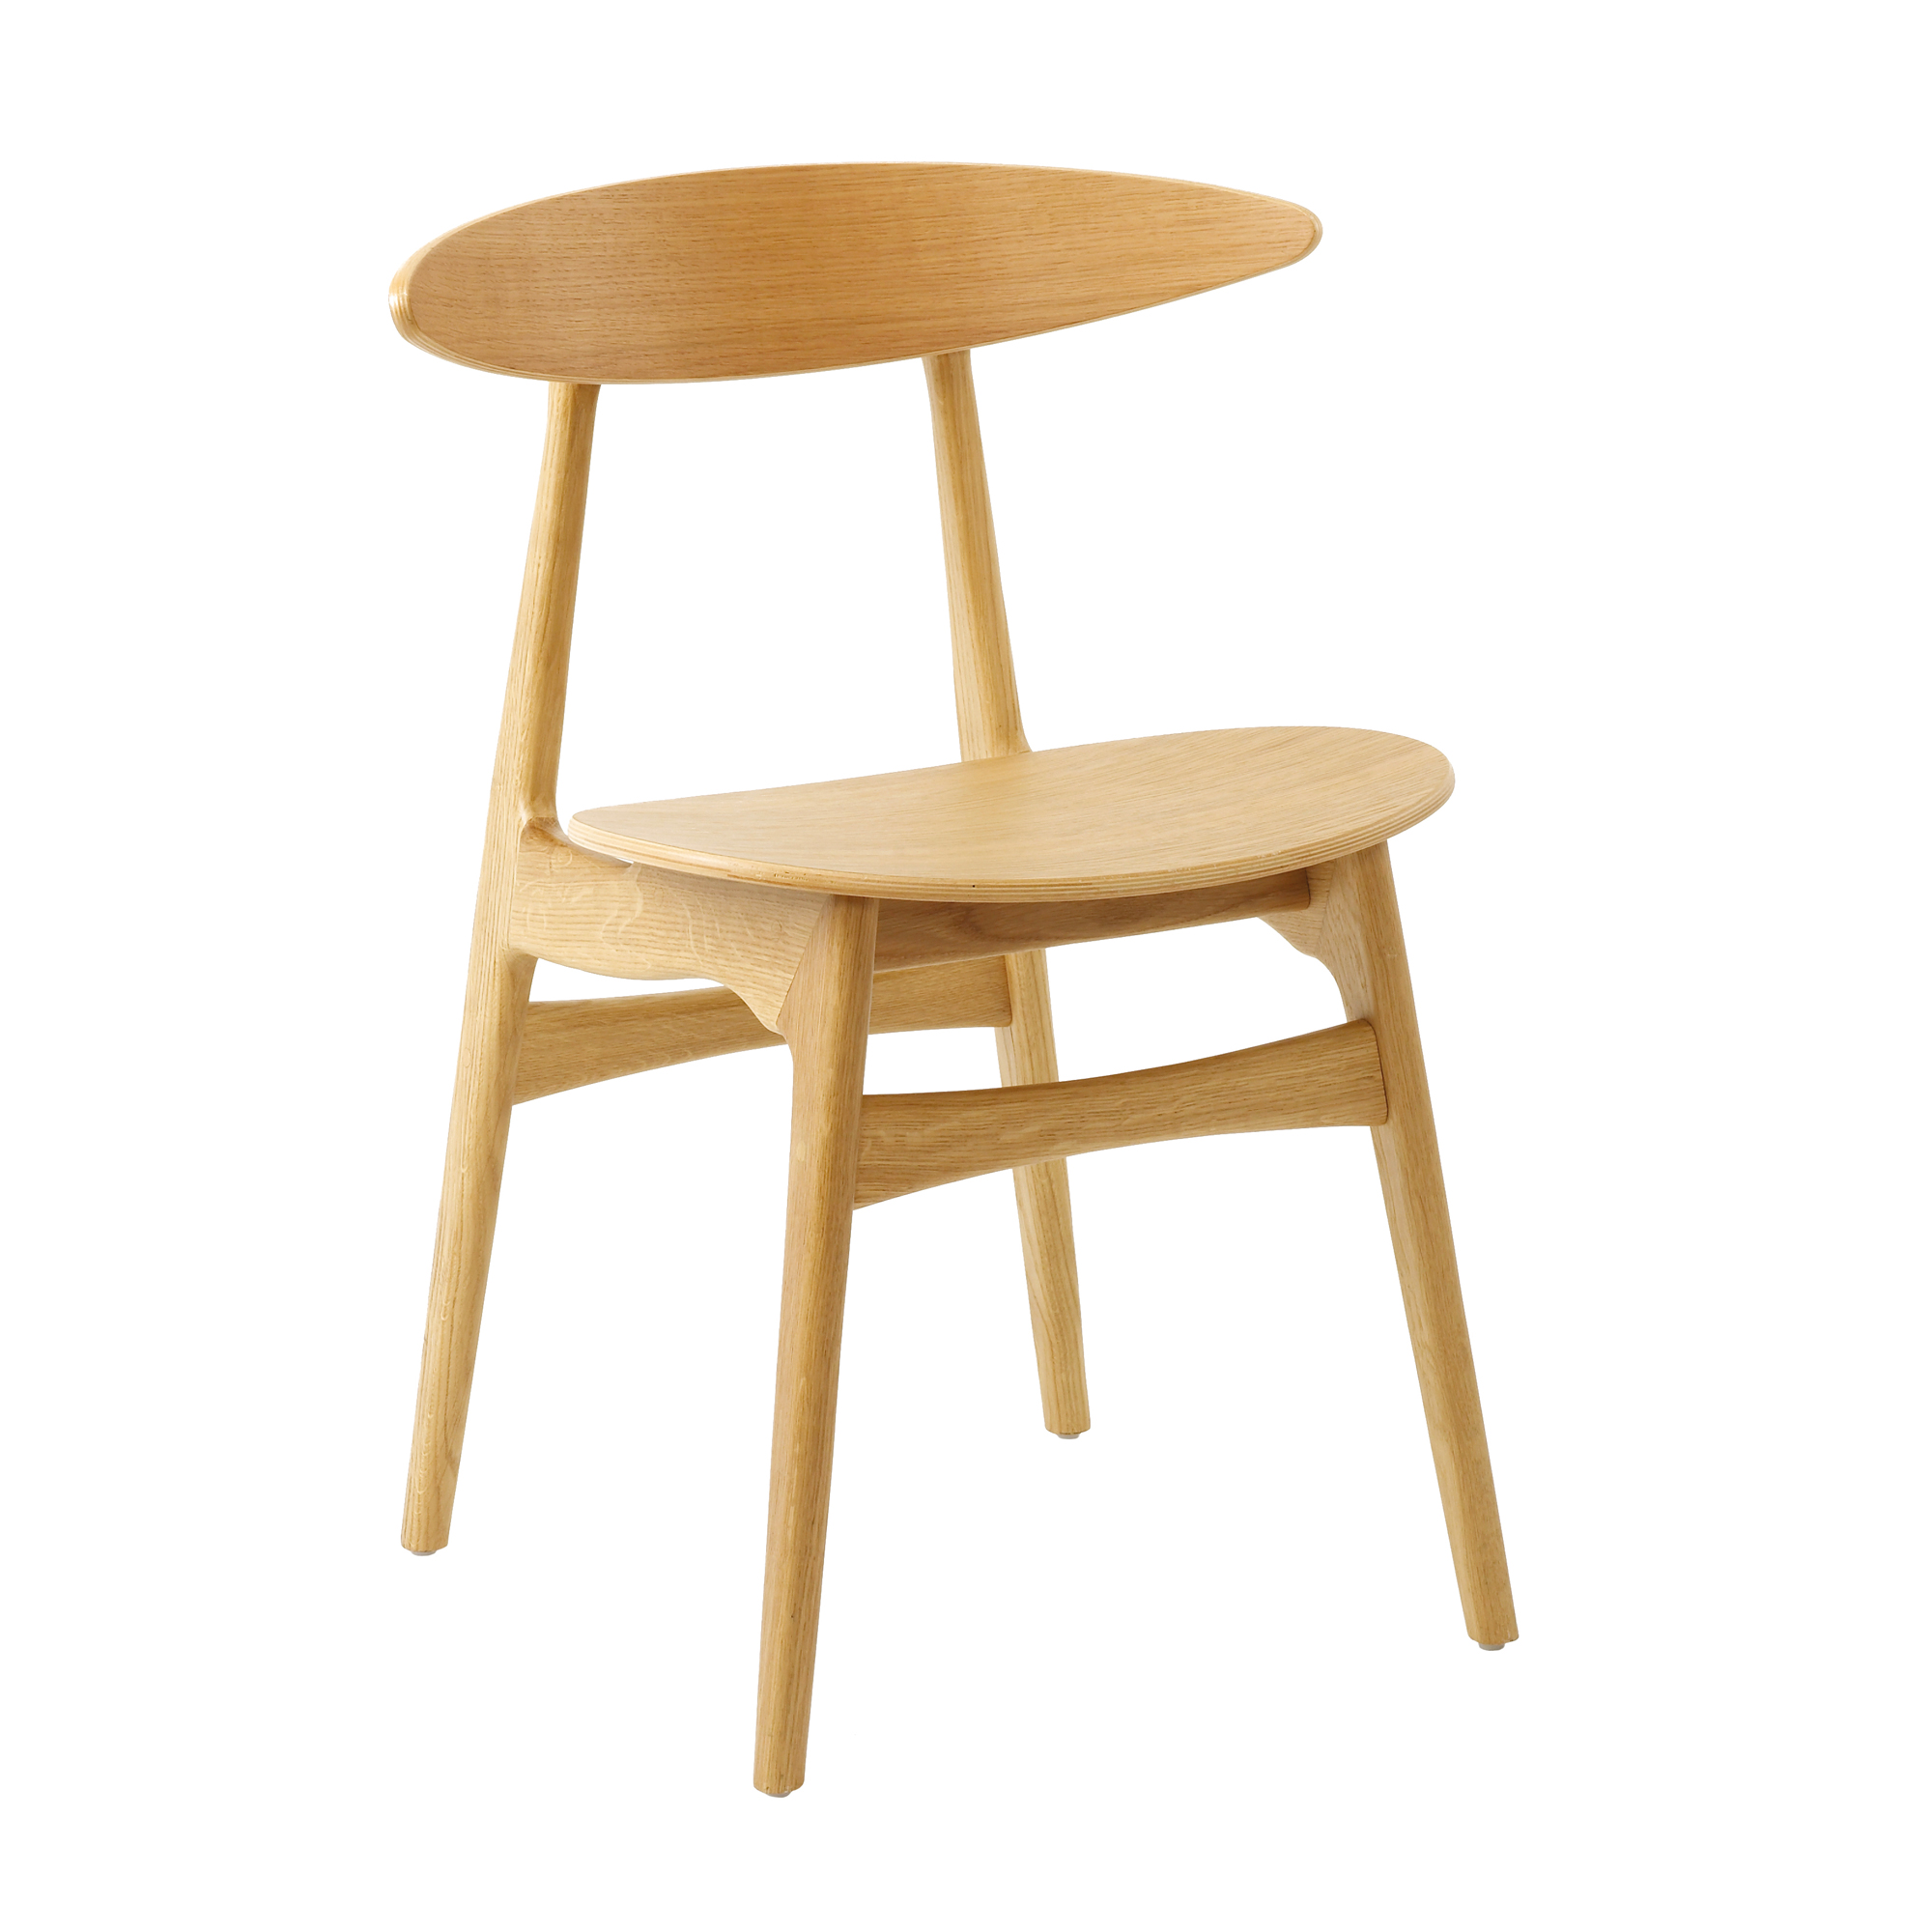 Carcher Side Chair